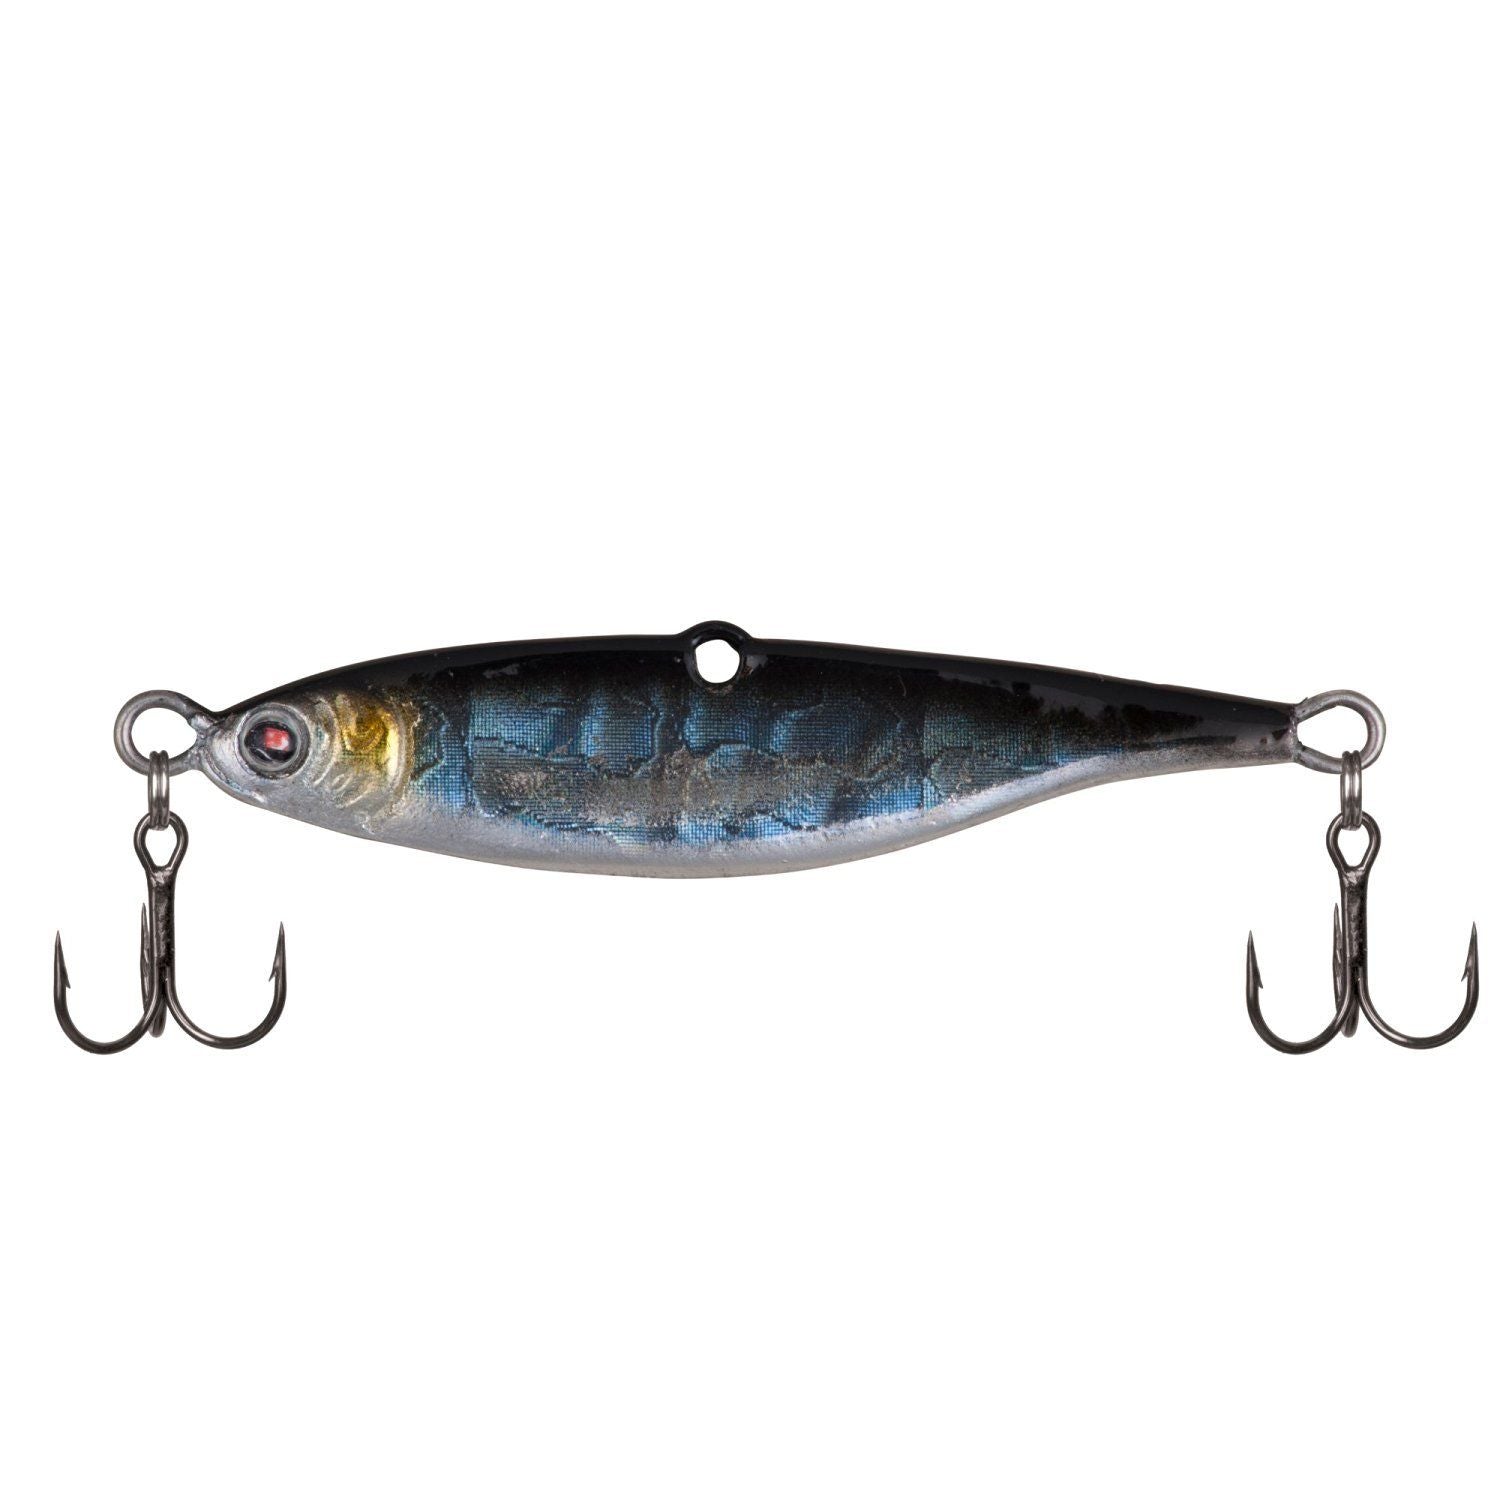  Acme Phoebe Fishing Lure (3-Pack), Silver, 1/8-Ounce